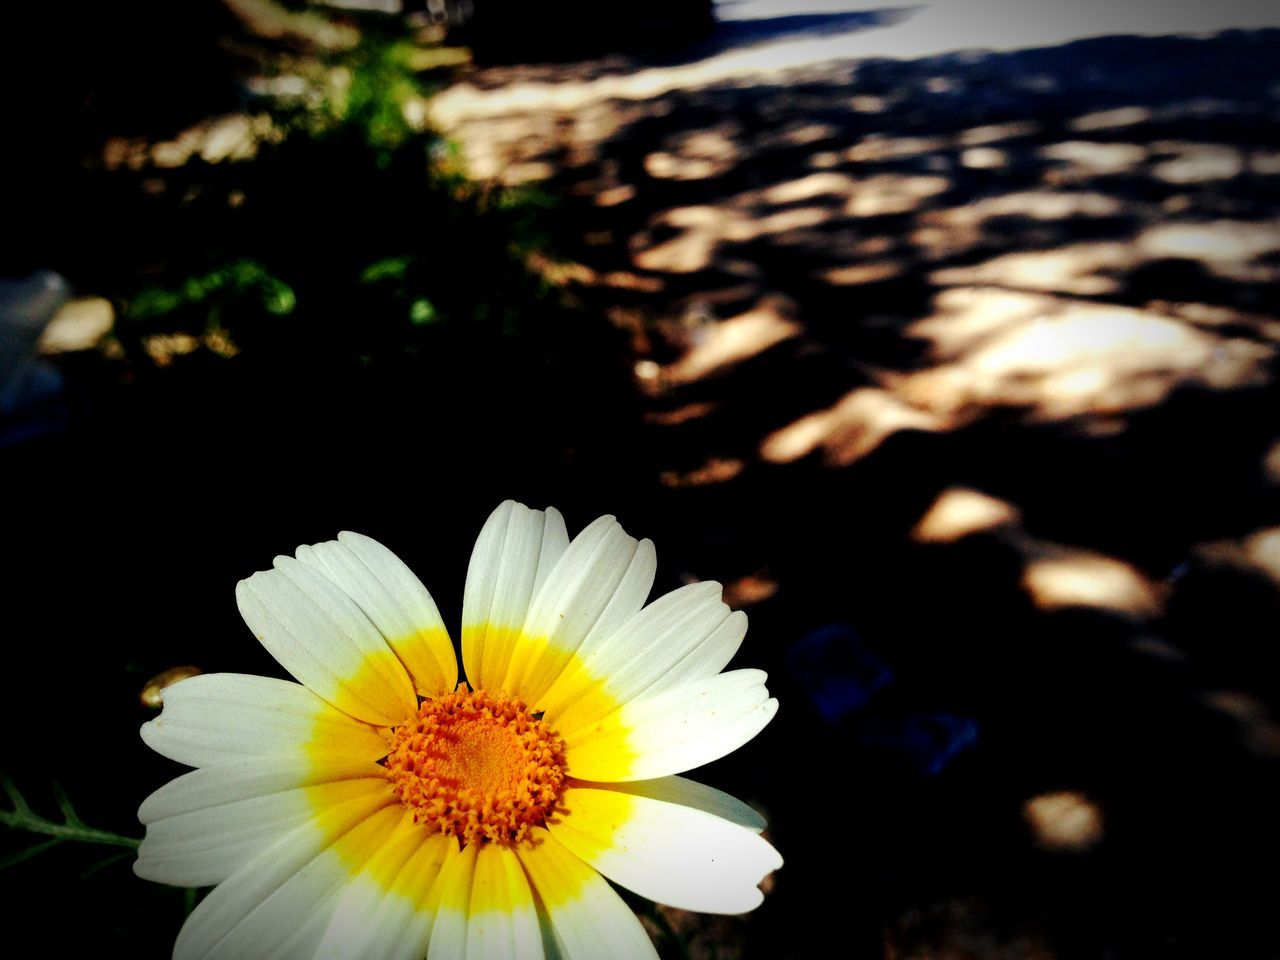 flower, petal, fragility, freshness, flower head, yellow, focus on foreground, close-up, growth, beauty in nature, pollen, blooming, nature, daisy, plant, in bloom, white color, outdoors, selective focus, day